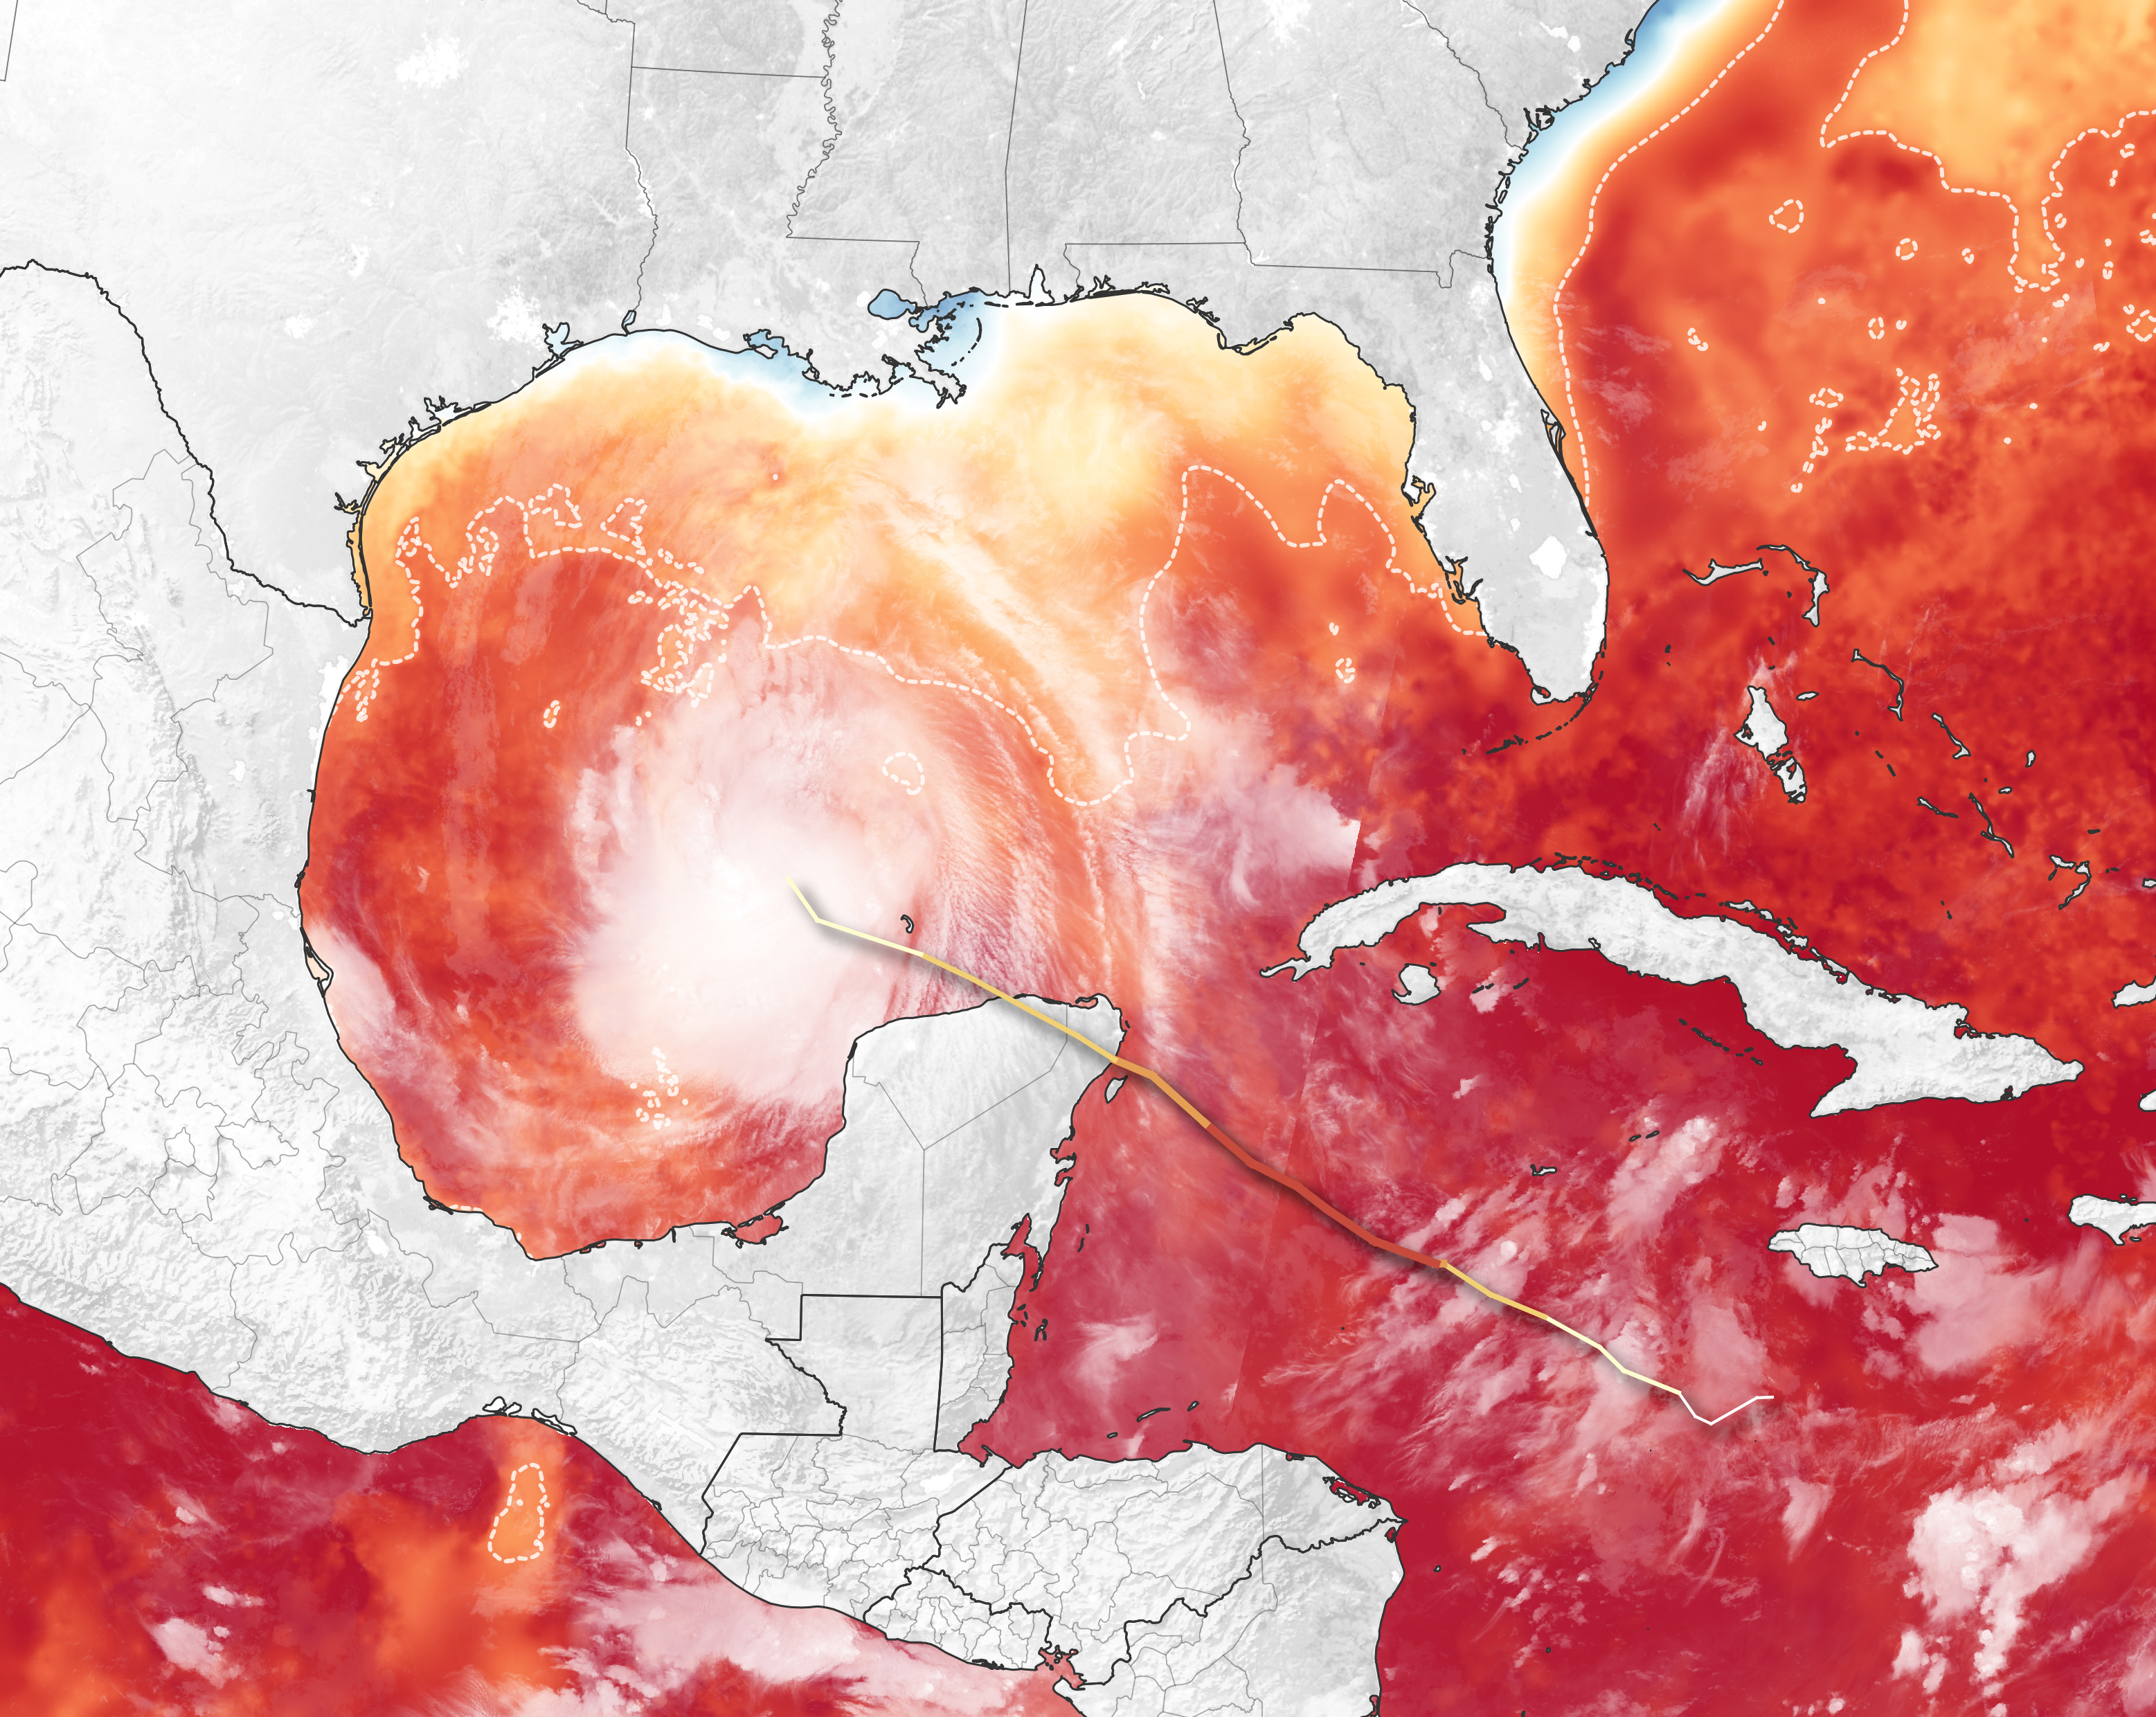 Hurricane Delta Aims for the U.S. Gulf Coast - related image preview